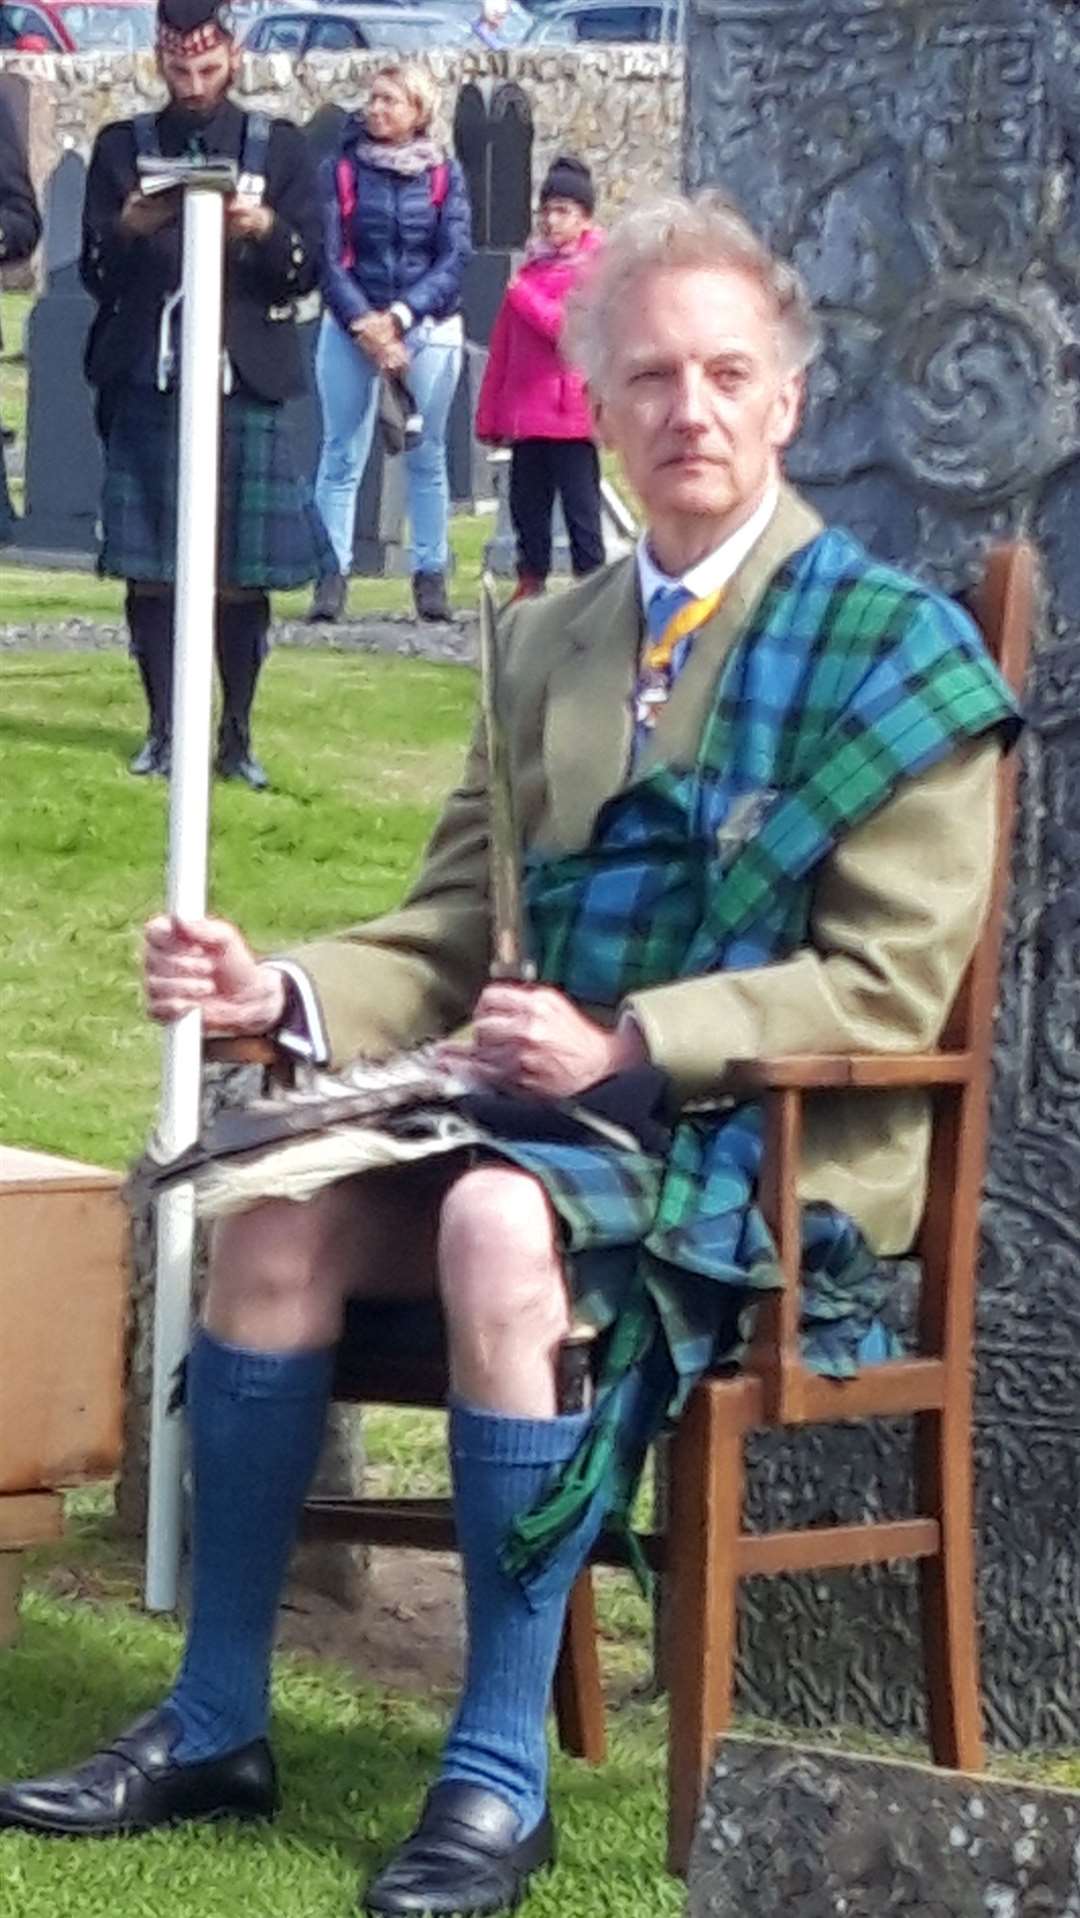 The chief of the Clan Mackay was presented with a staff.